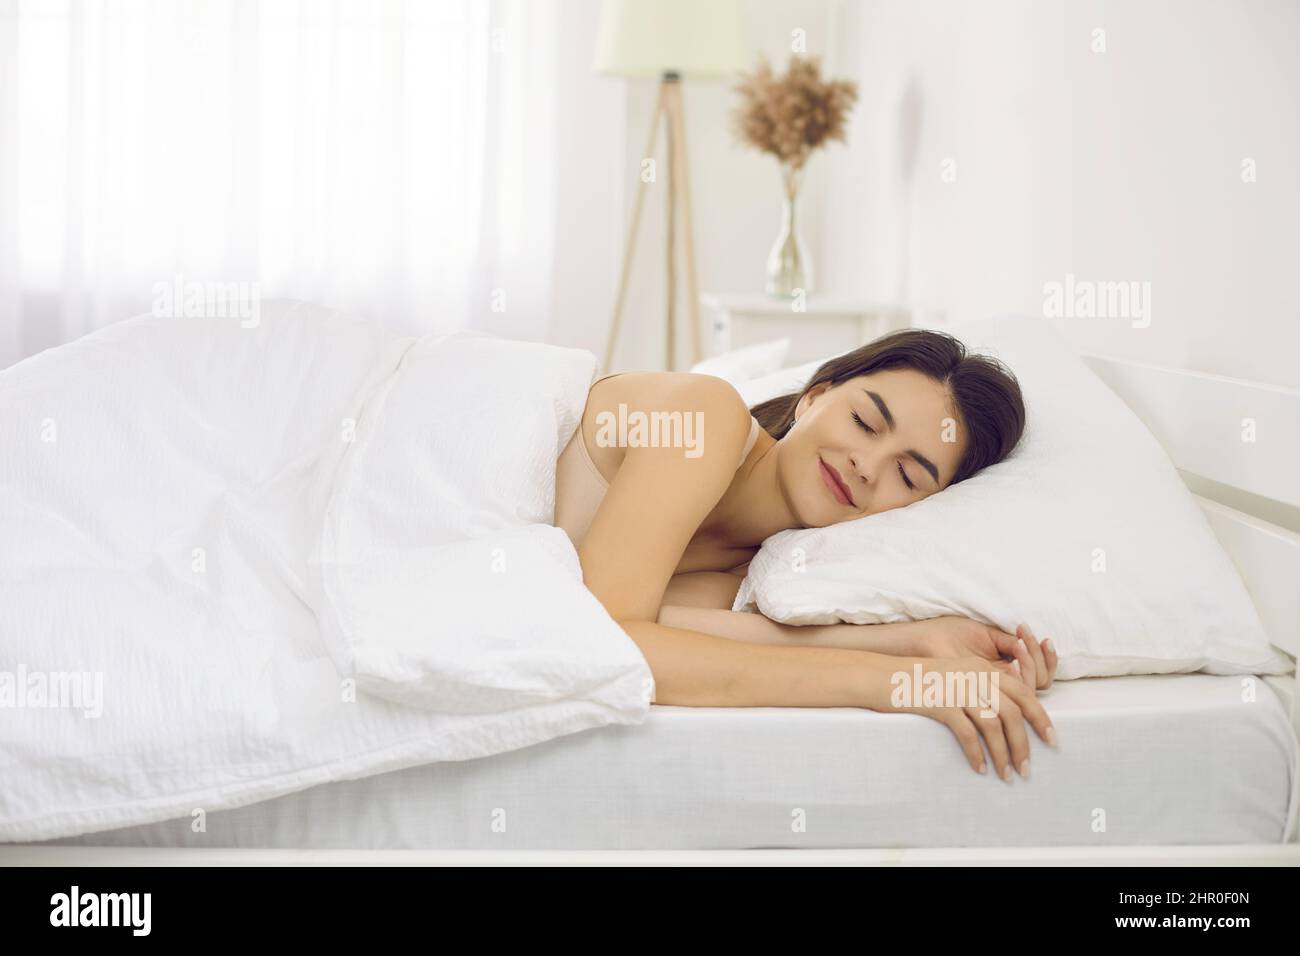 Happy tranquil beautiful woman napping lying on comfortable bedding in bedroom at home alone. Stock Photo